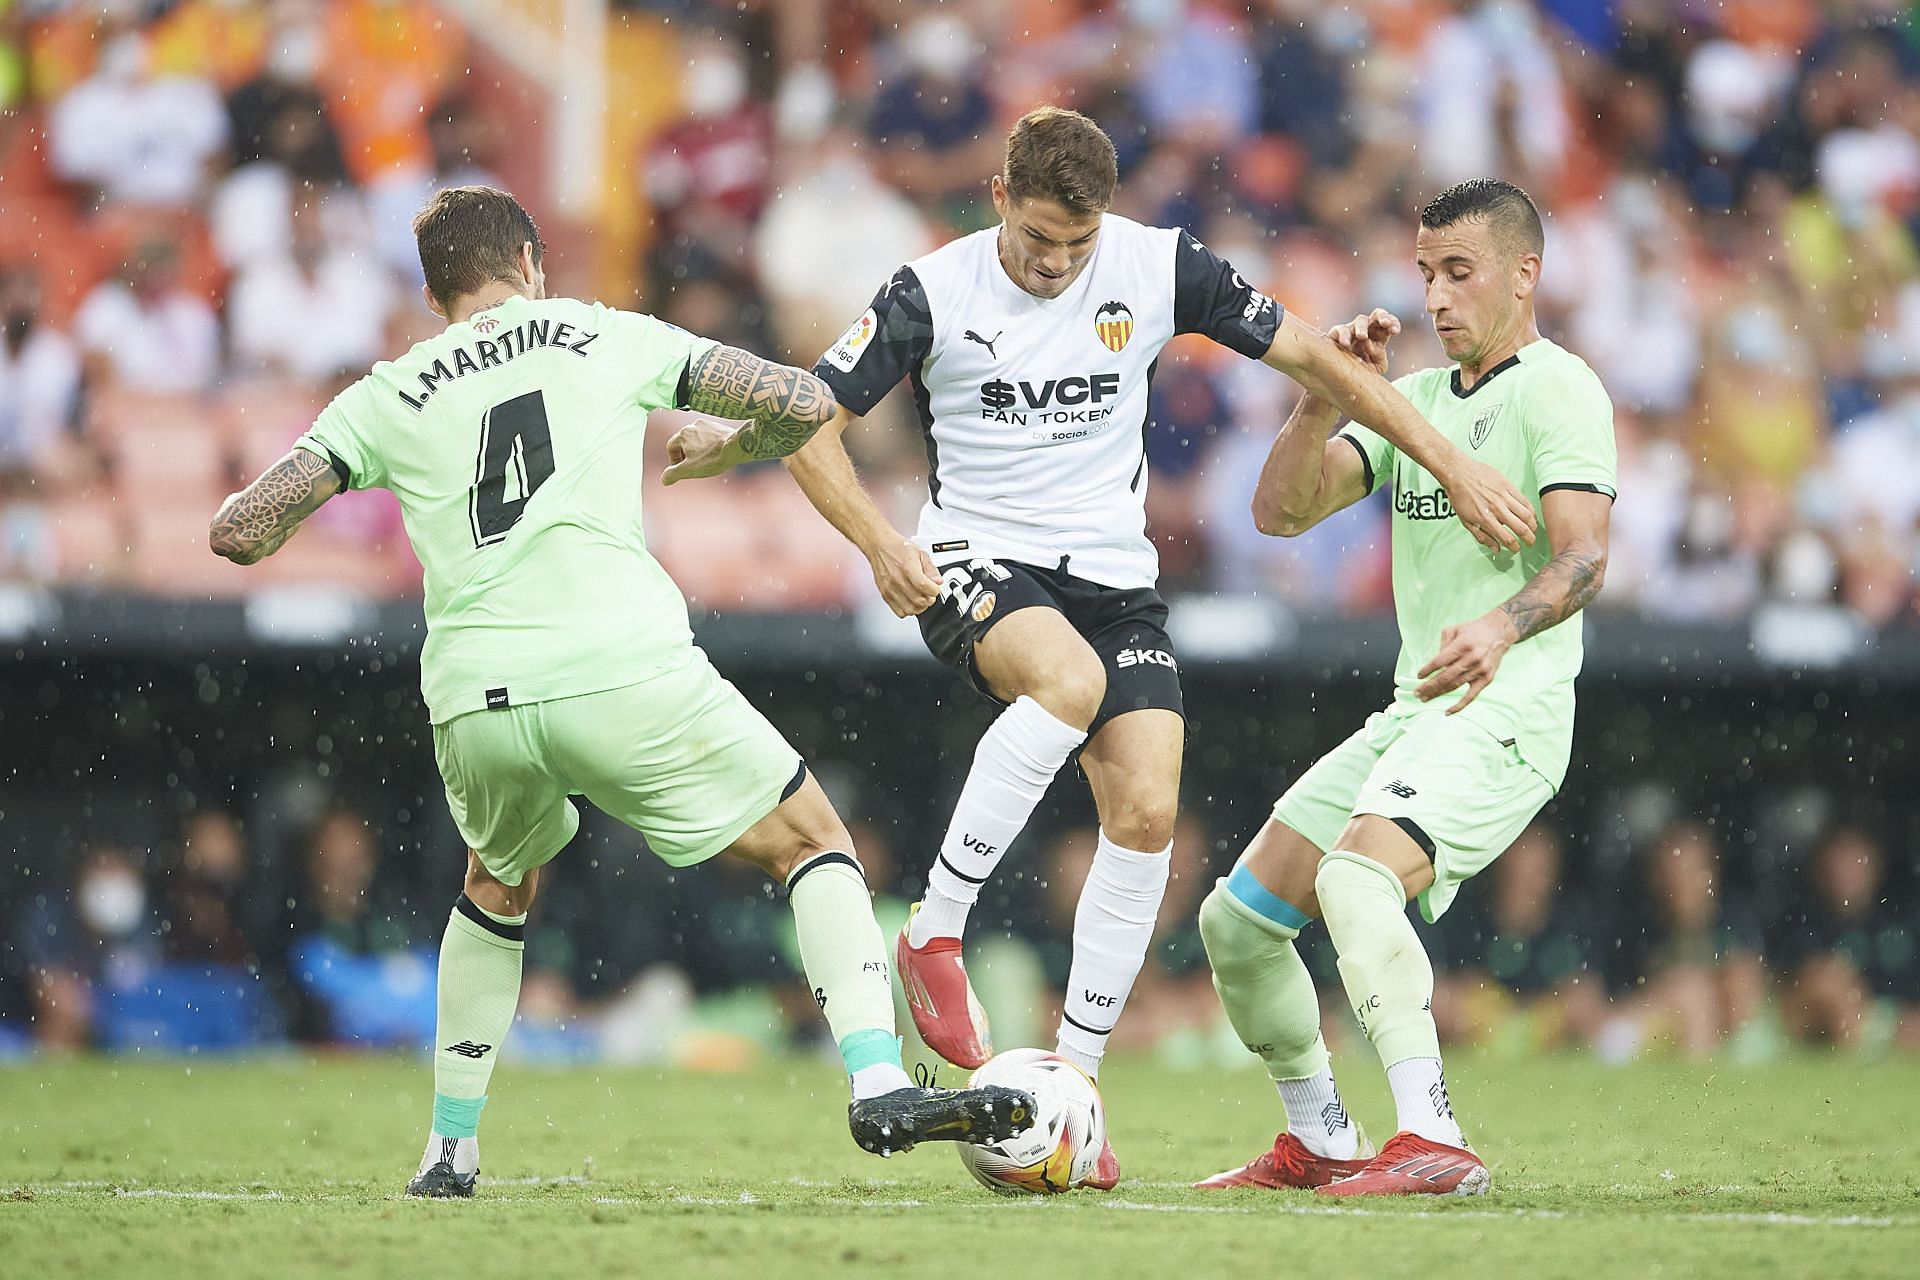 Valencia and Athletic Bilbao square off in a decisive second-leg fixture of the Copa del Rey semi-final on Wednesday